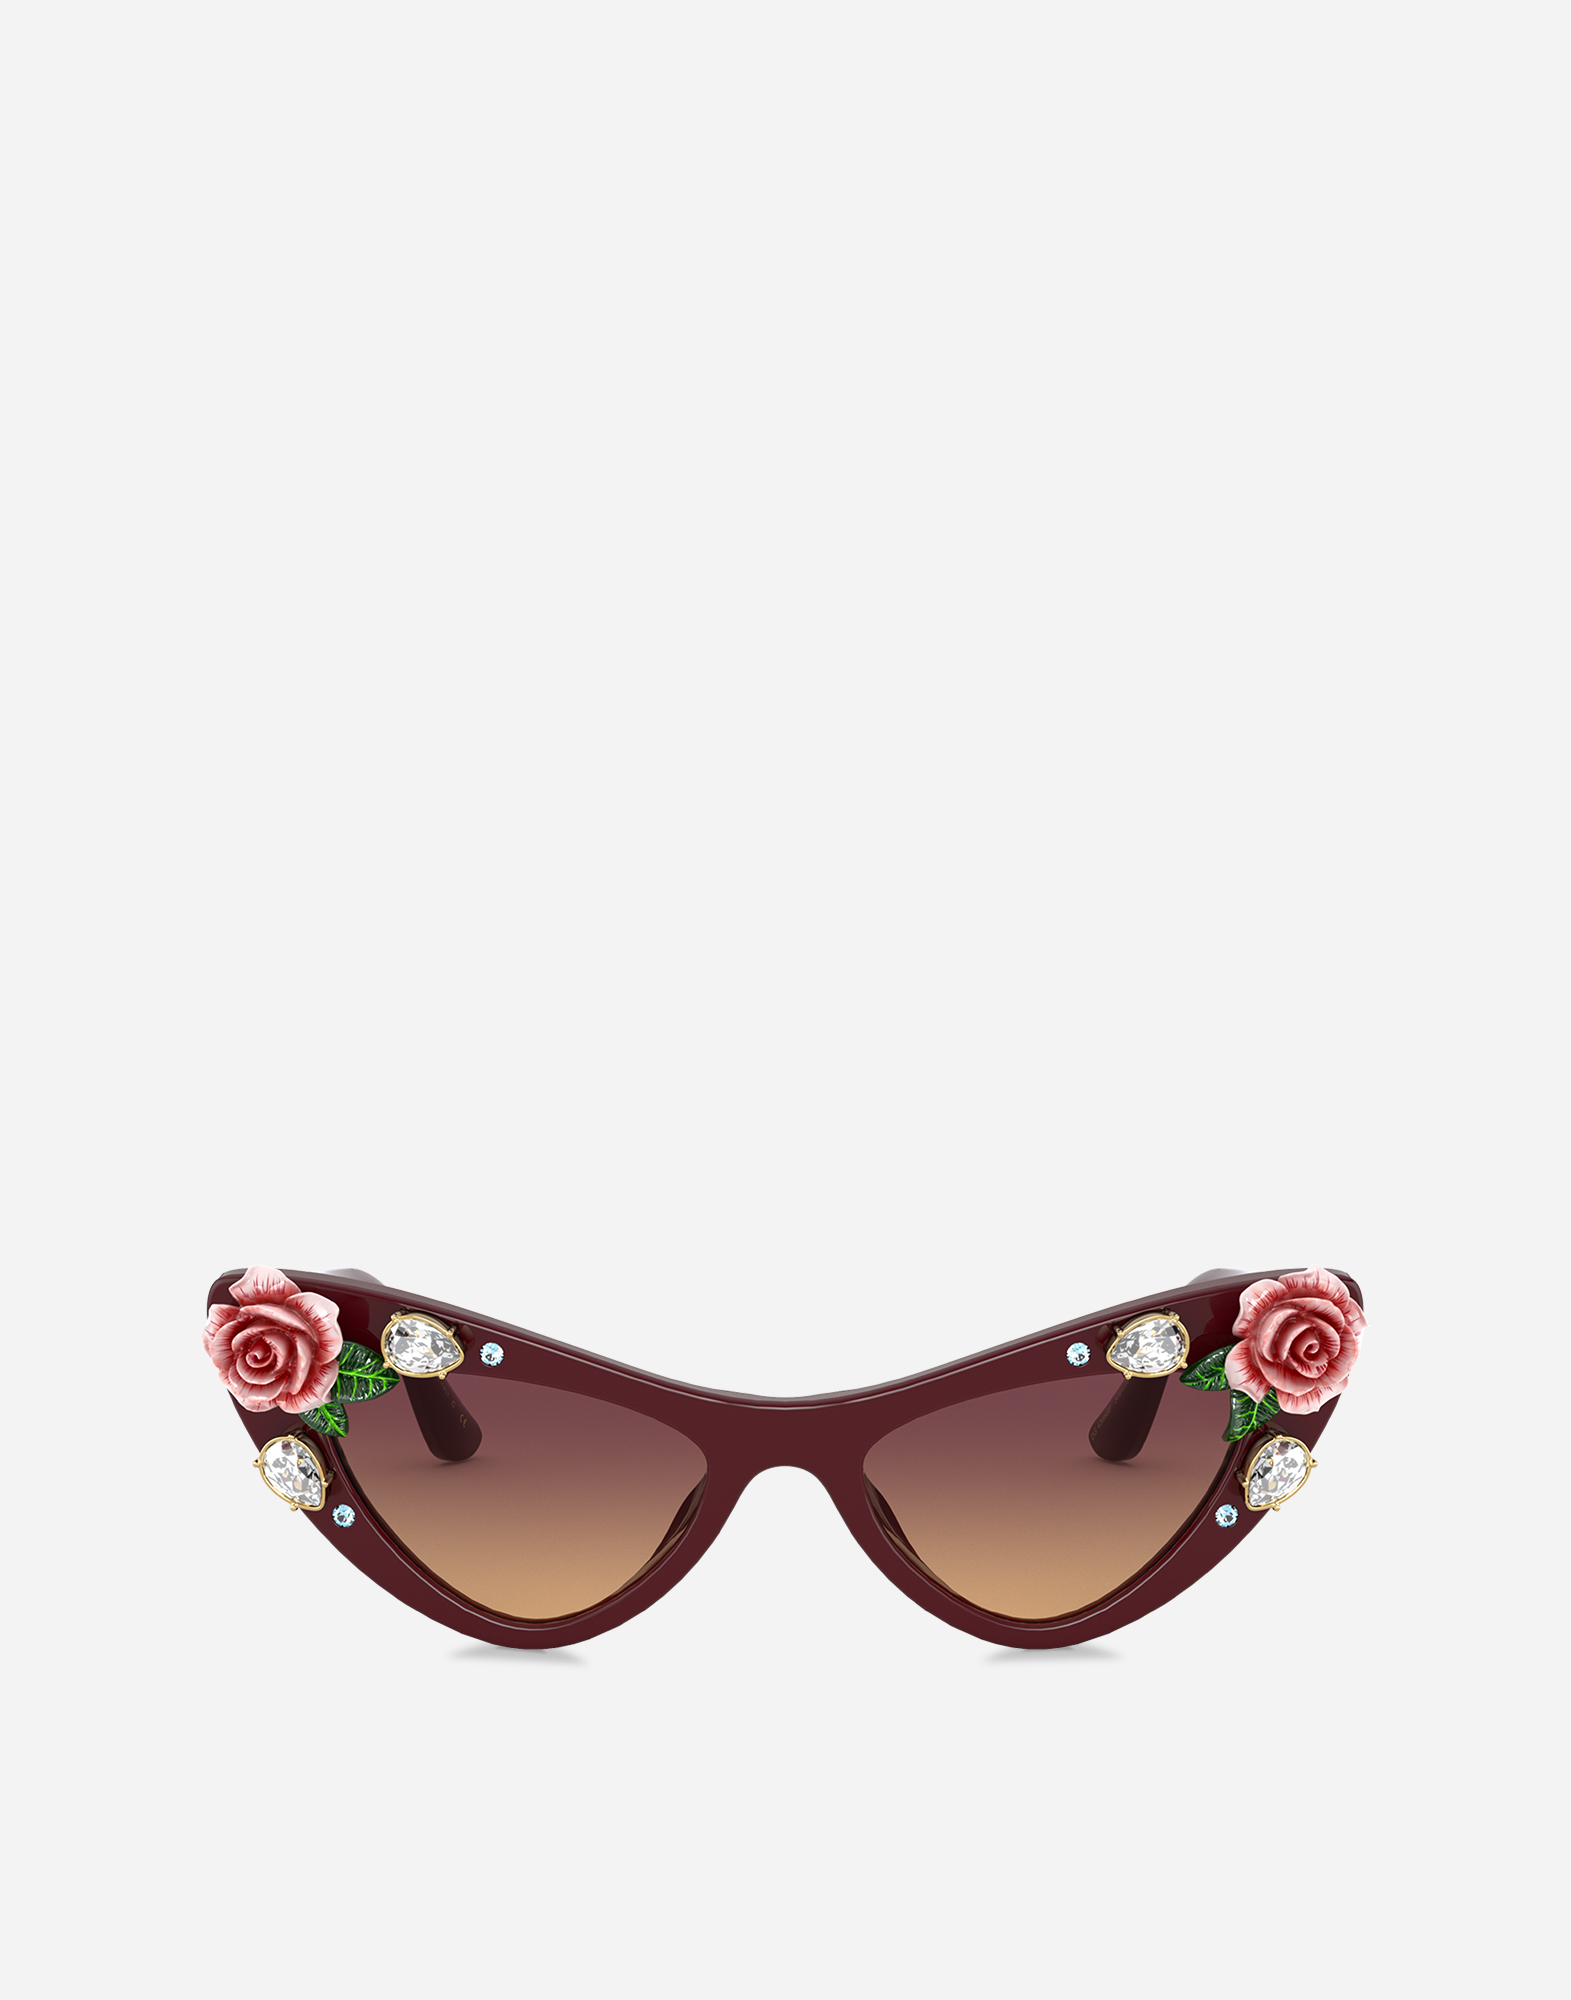 Blooming sunglasses in Bordeaux